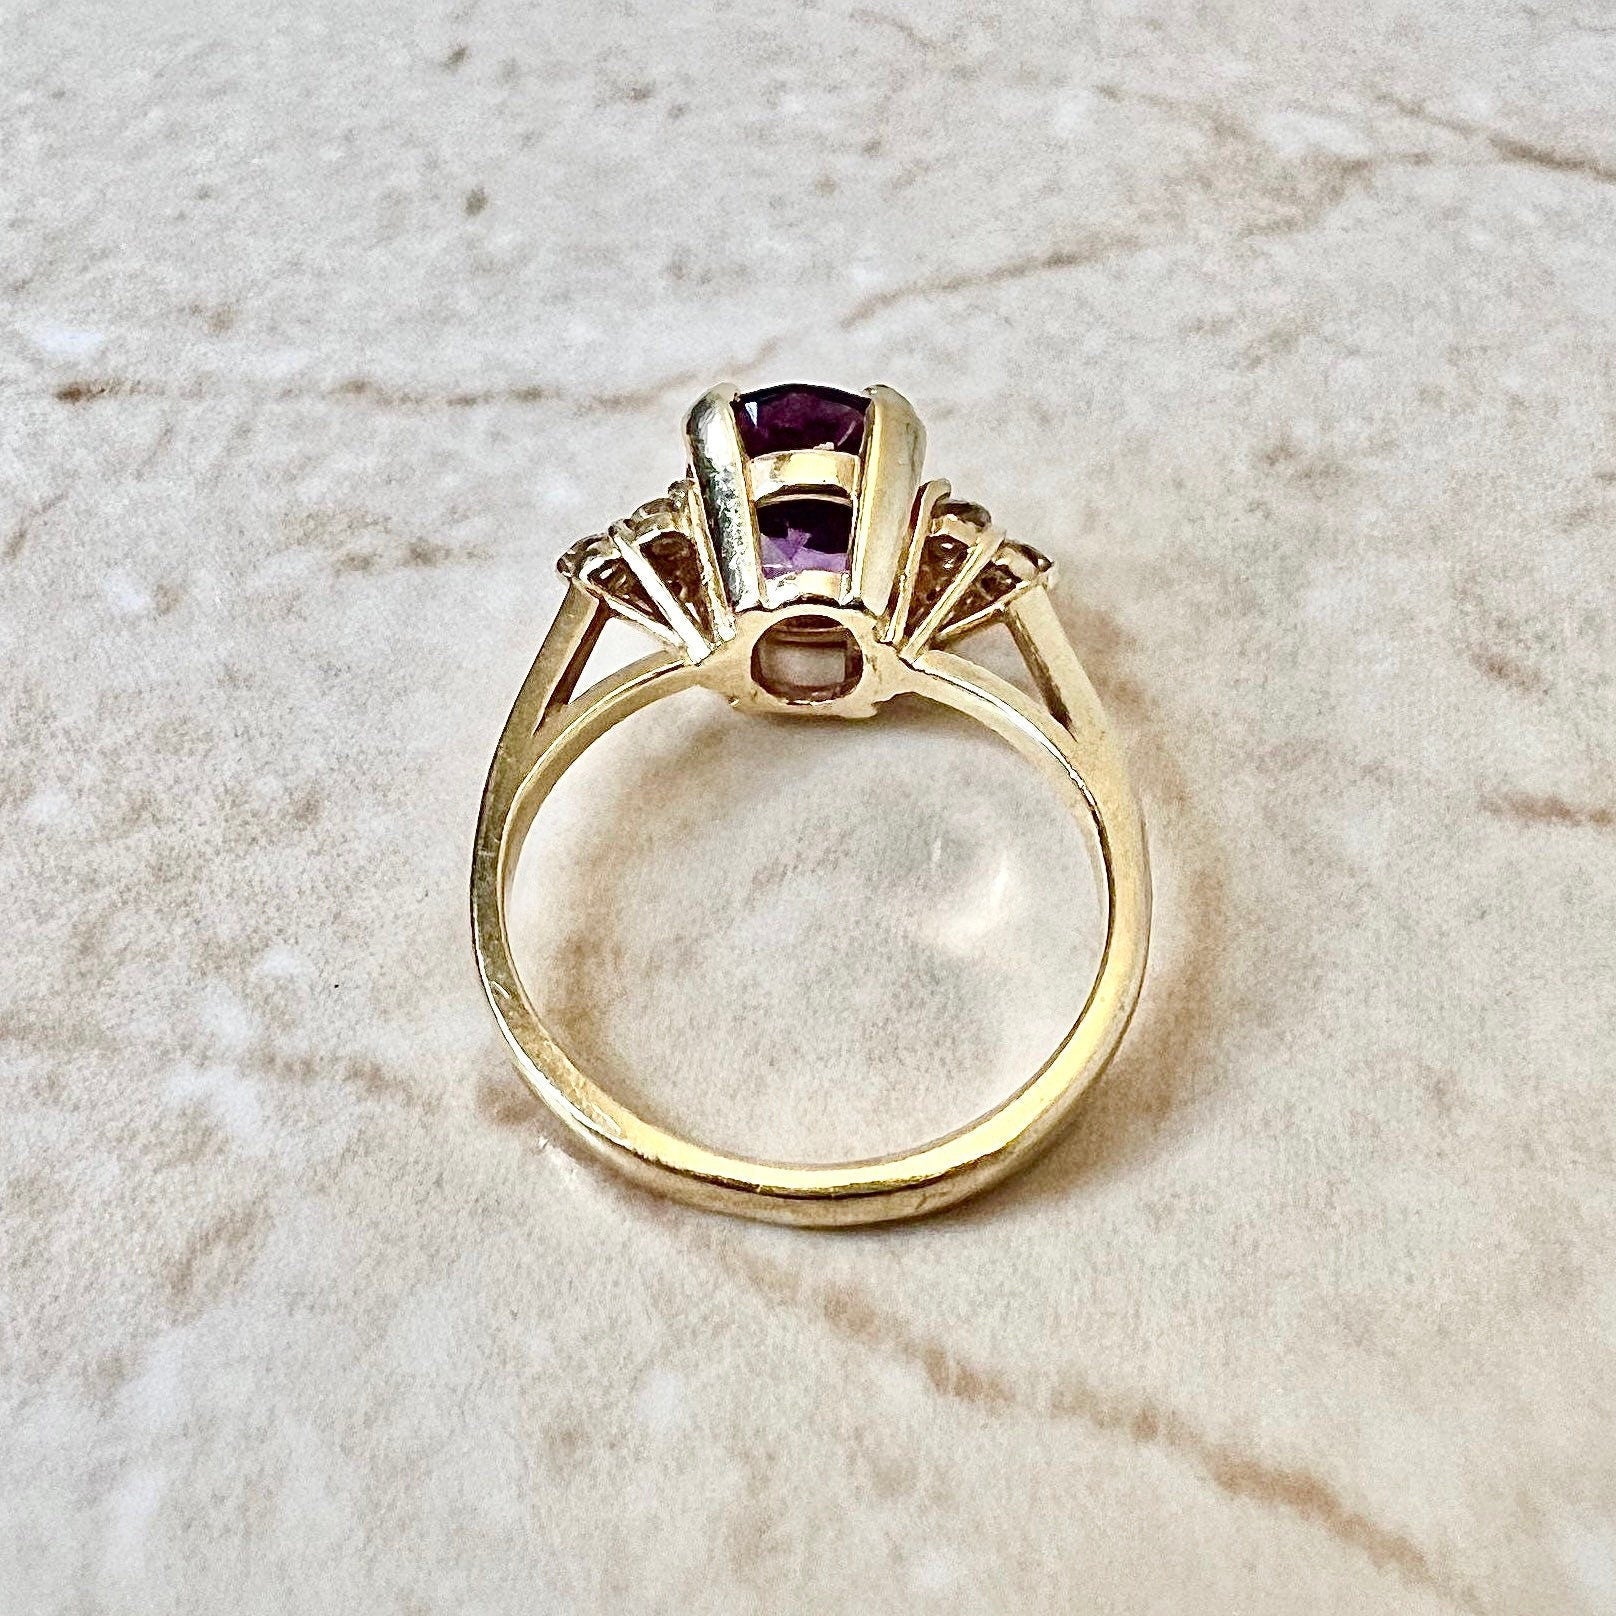 14K Oval Amethyst & Diamond Ring - Yellow Gold Cocktail Ring - Birthday Gift - Love Ring - February Birthstone - Gift For Her - Jewelry Sale